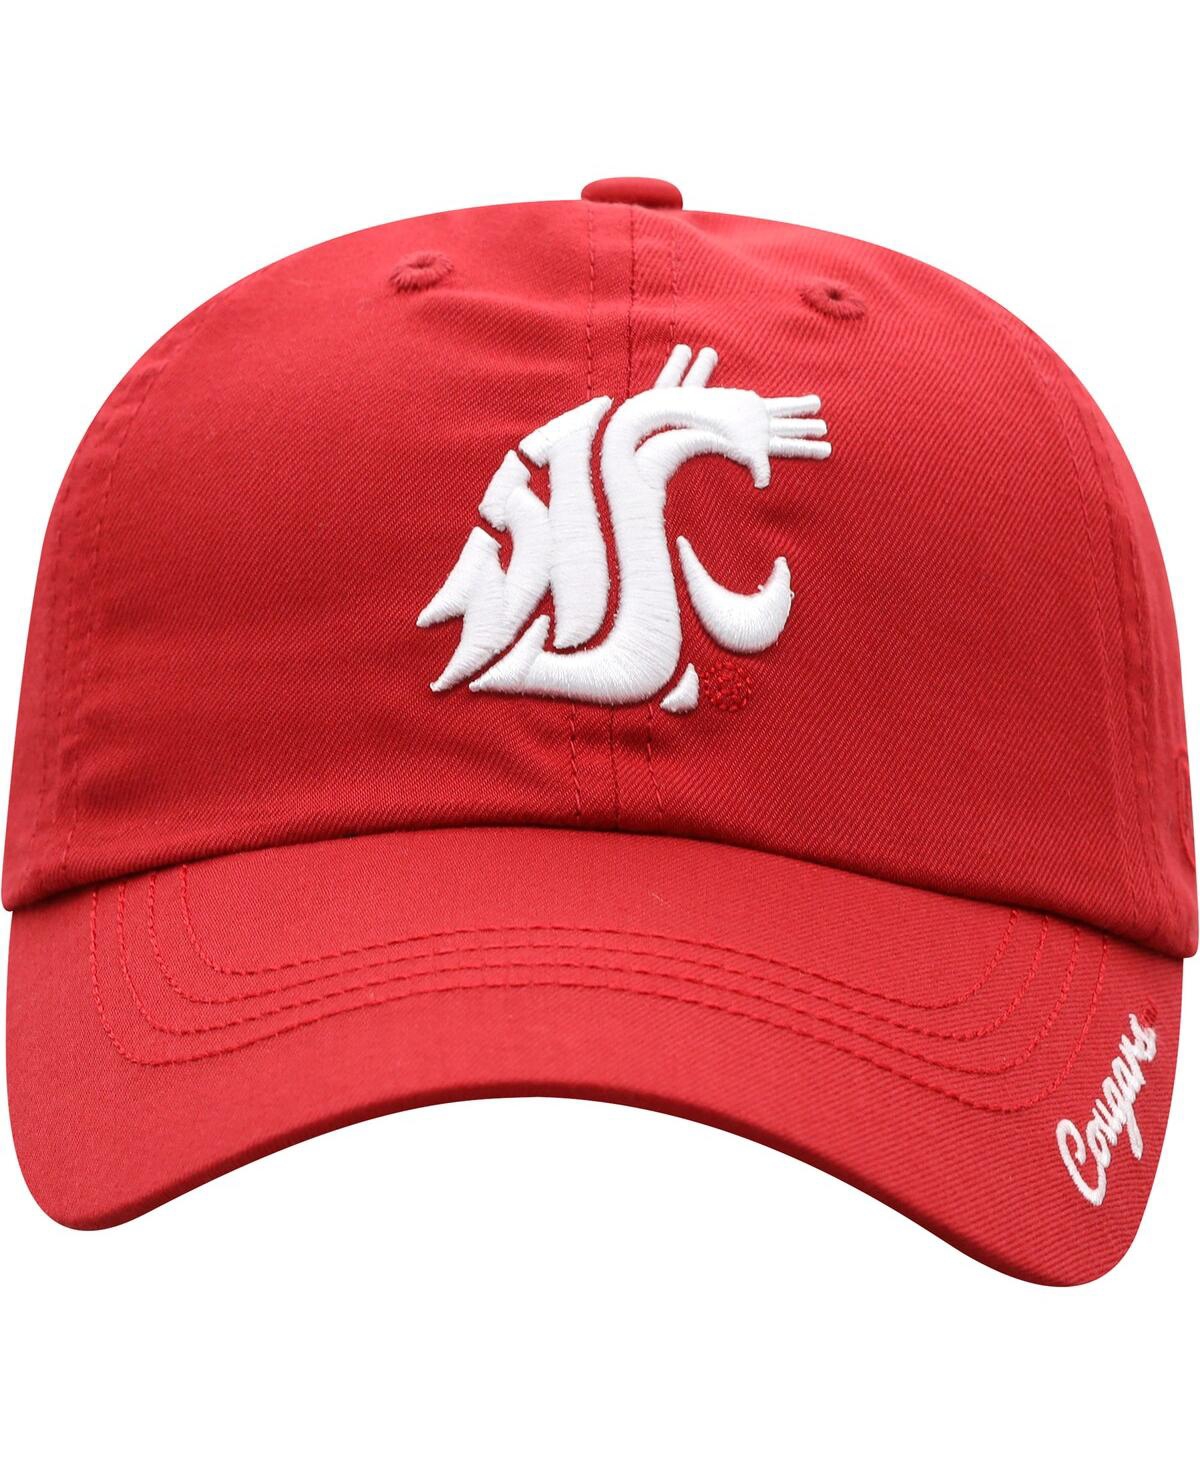 Shop Top Of The World Women's  Cardinal Washington State Cougars Staple Adjustable Hat